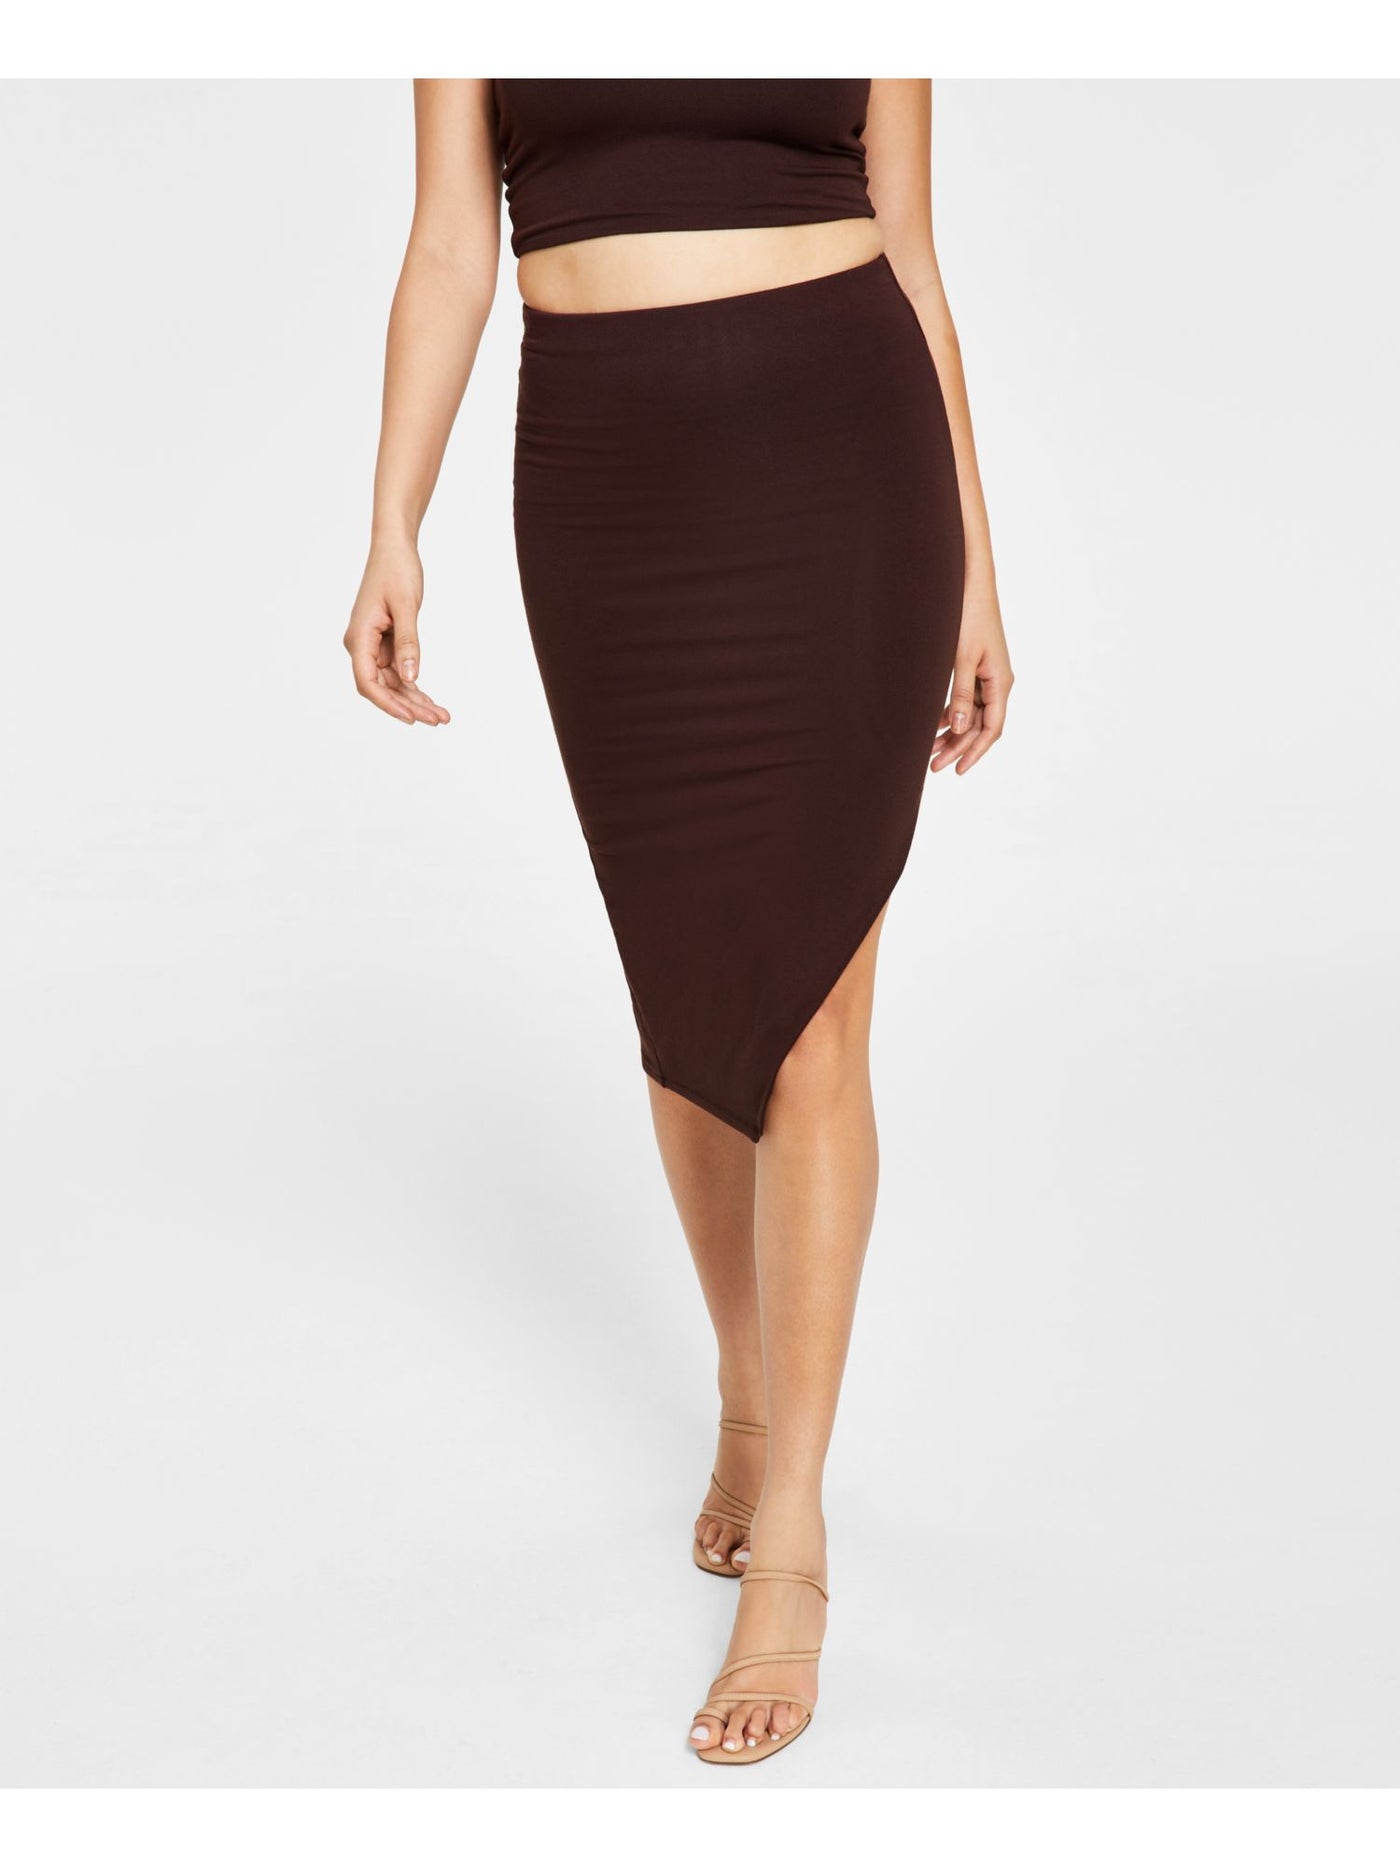 BAR III Womens Brown Slitted Unlined Pull-on Below The Knee Party Pencil Skirt L